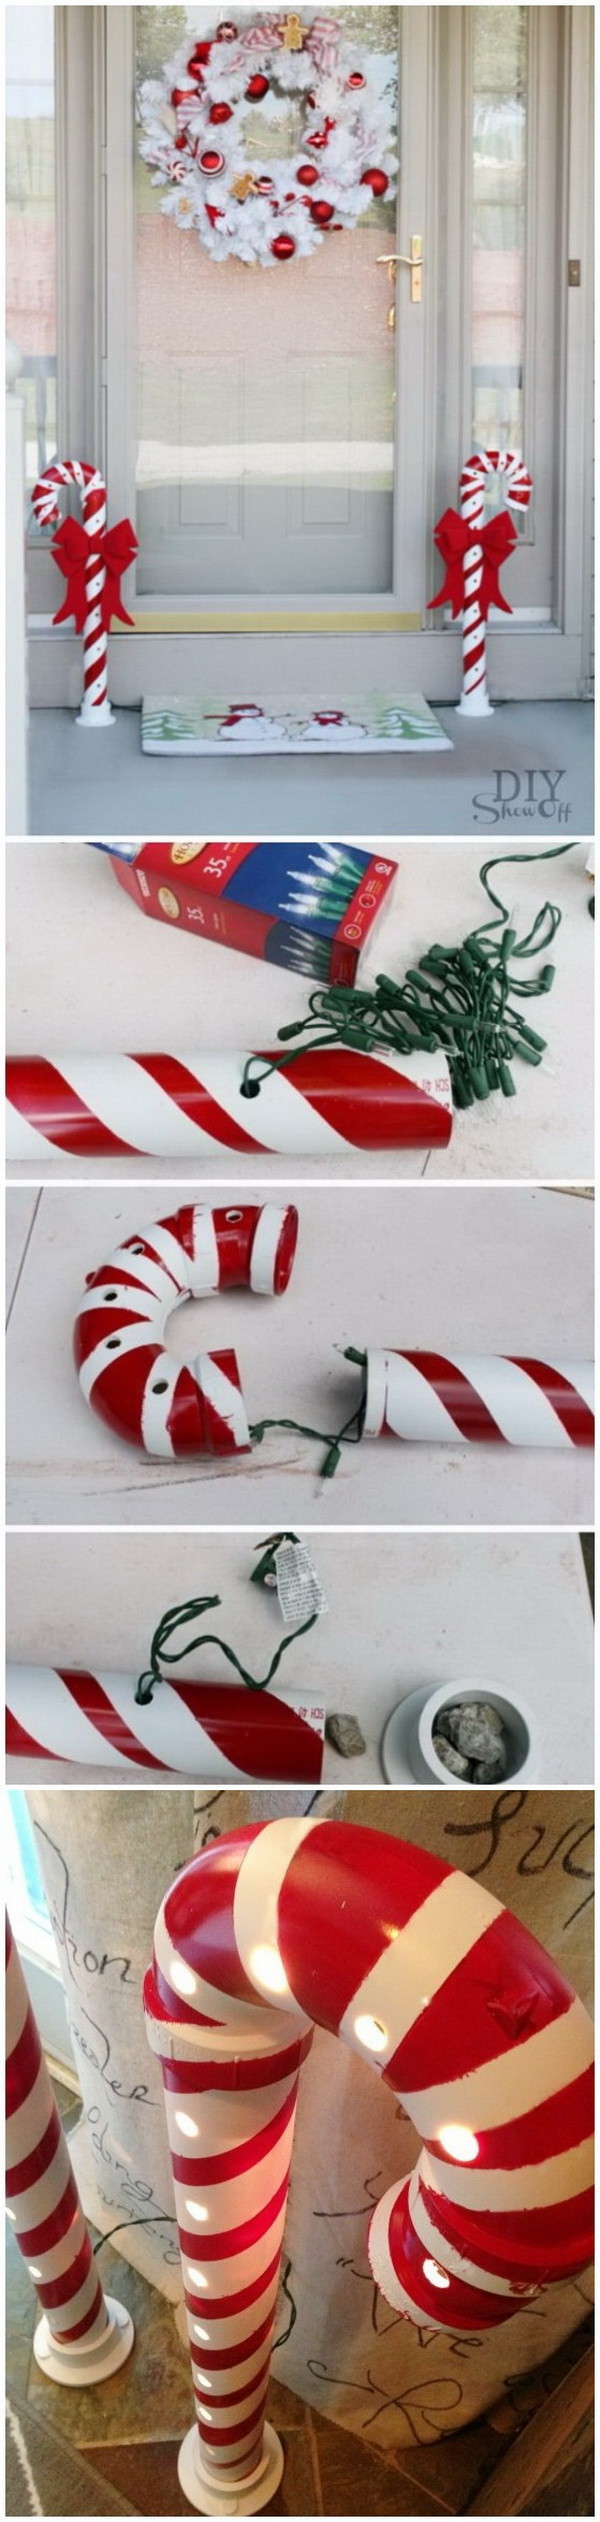 DIY Outdoor Christmas Candy Decorations
 Candy Cane Decorating Ideas